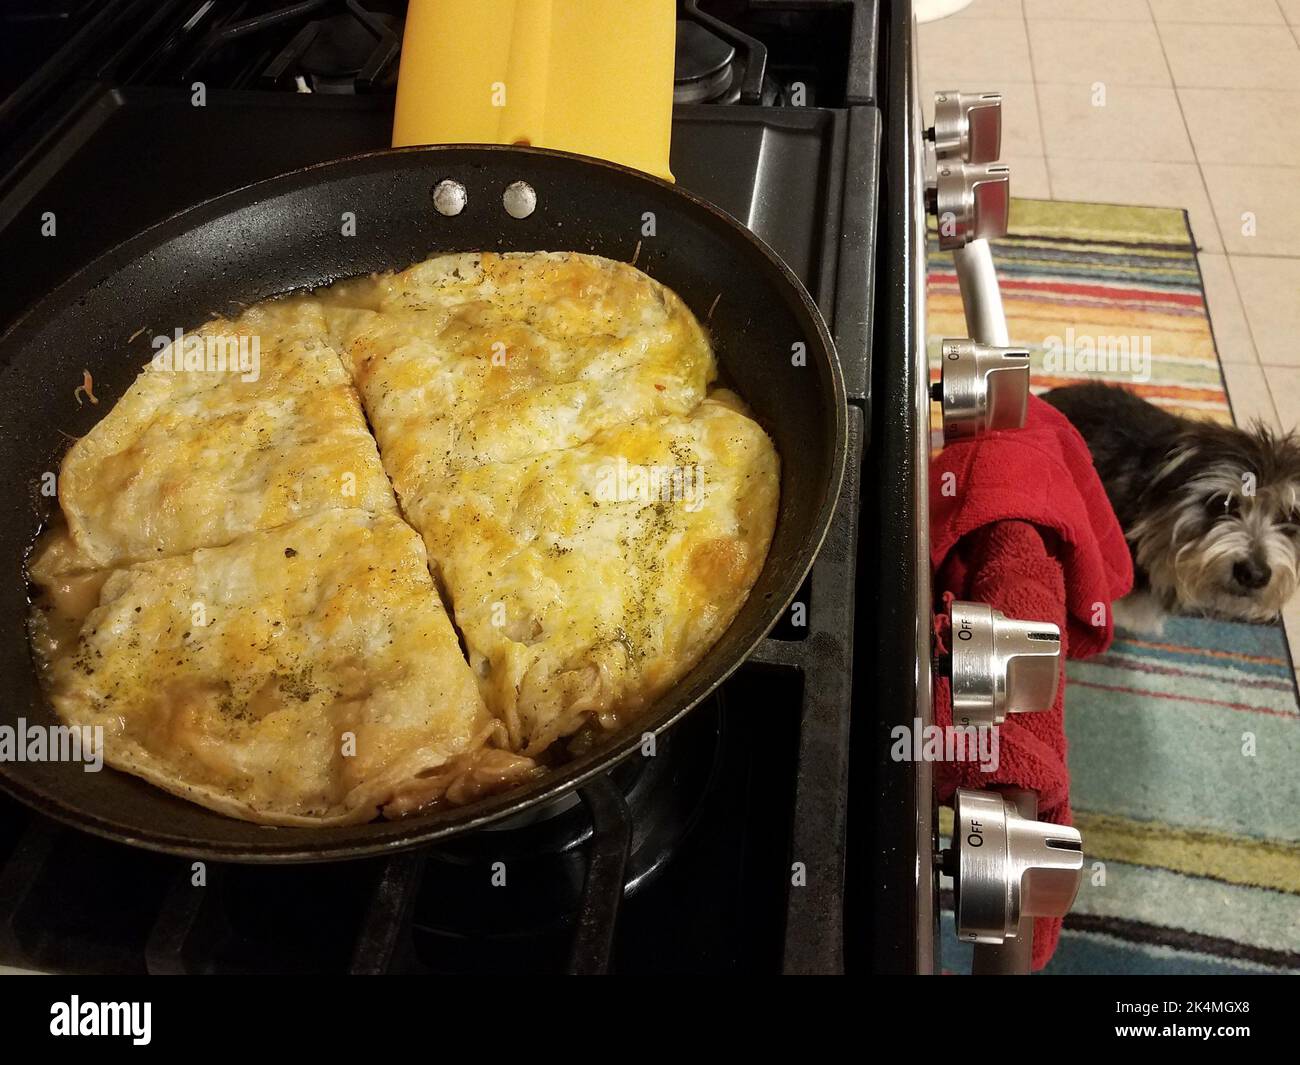 https://c8.alamy.com/comp/2K4MGX8/tortillas-with-cheese-cooking-in-a-frying-pan-or-skillet-on-the-stove-with-dog-2K4MGX8.jpg